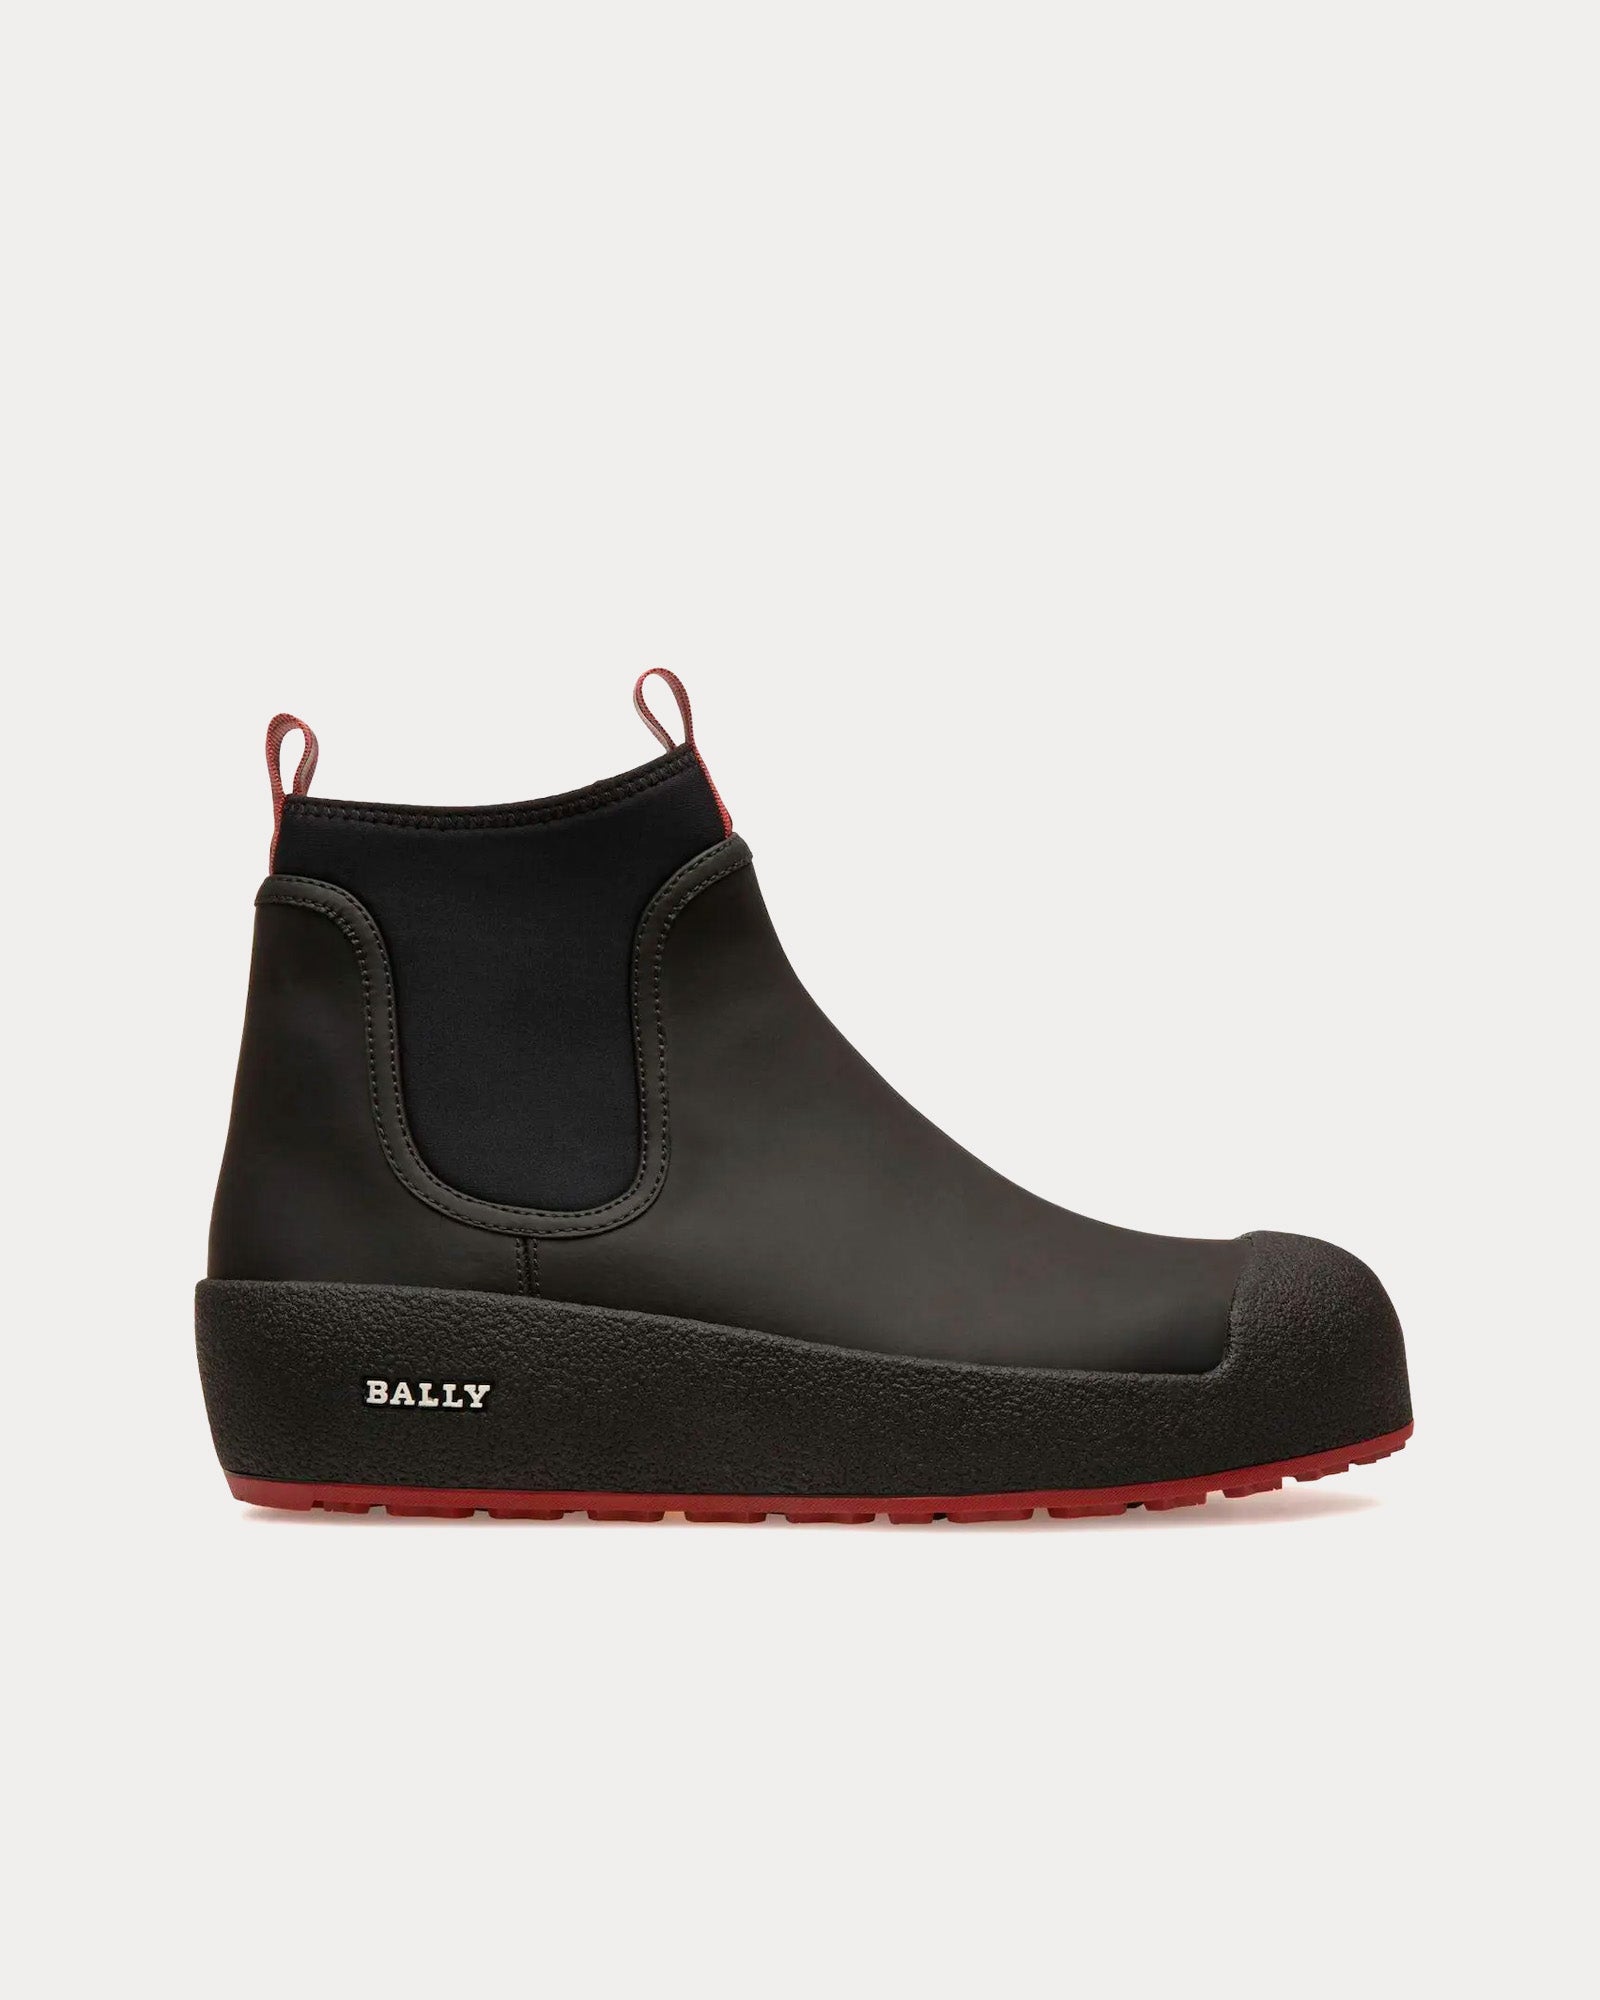 Bally - Curling Leather Black Boots